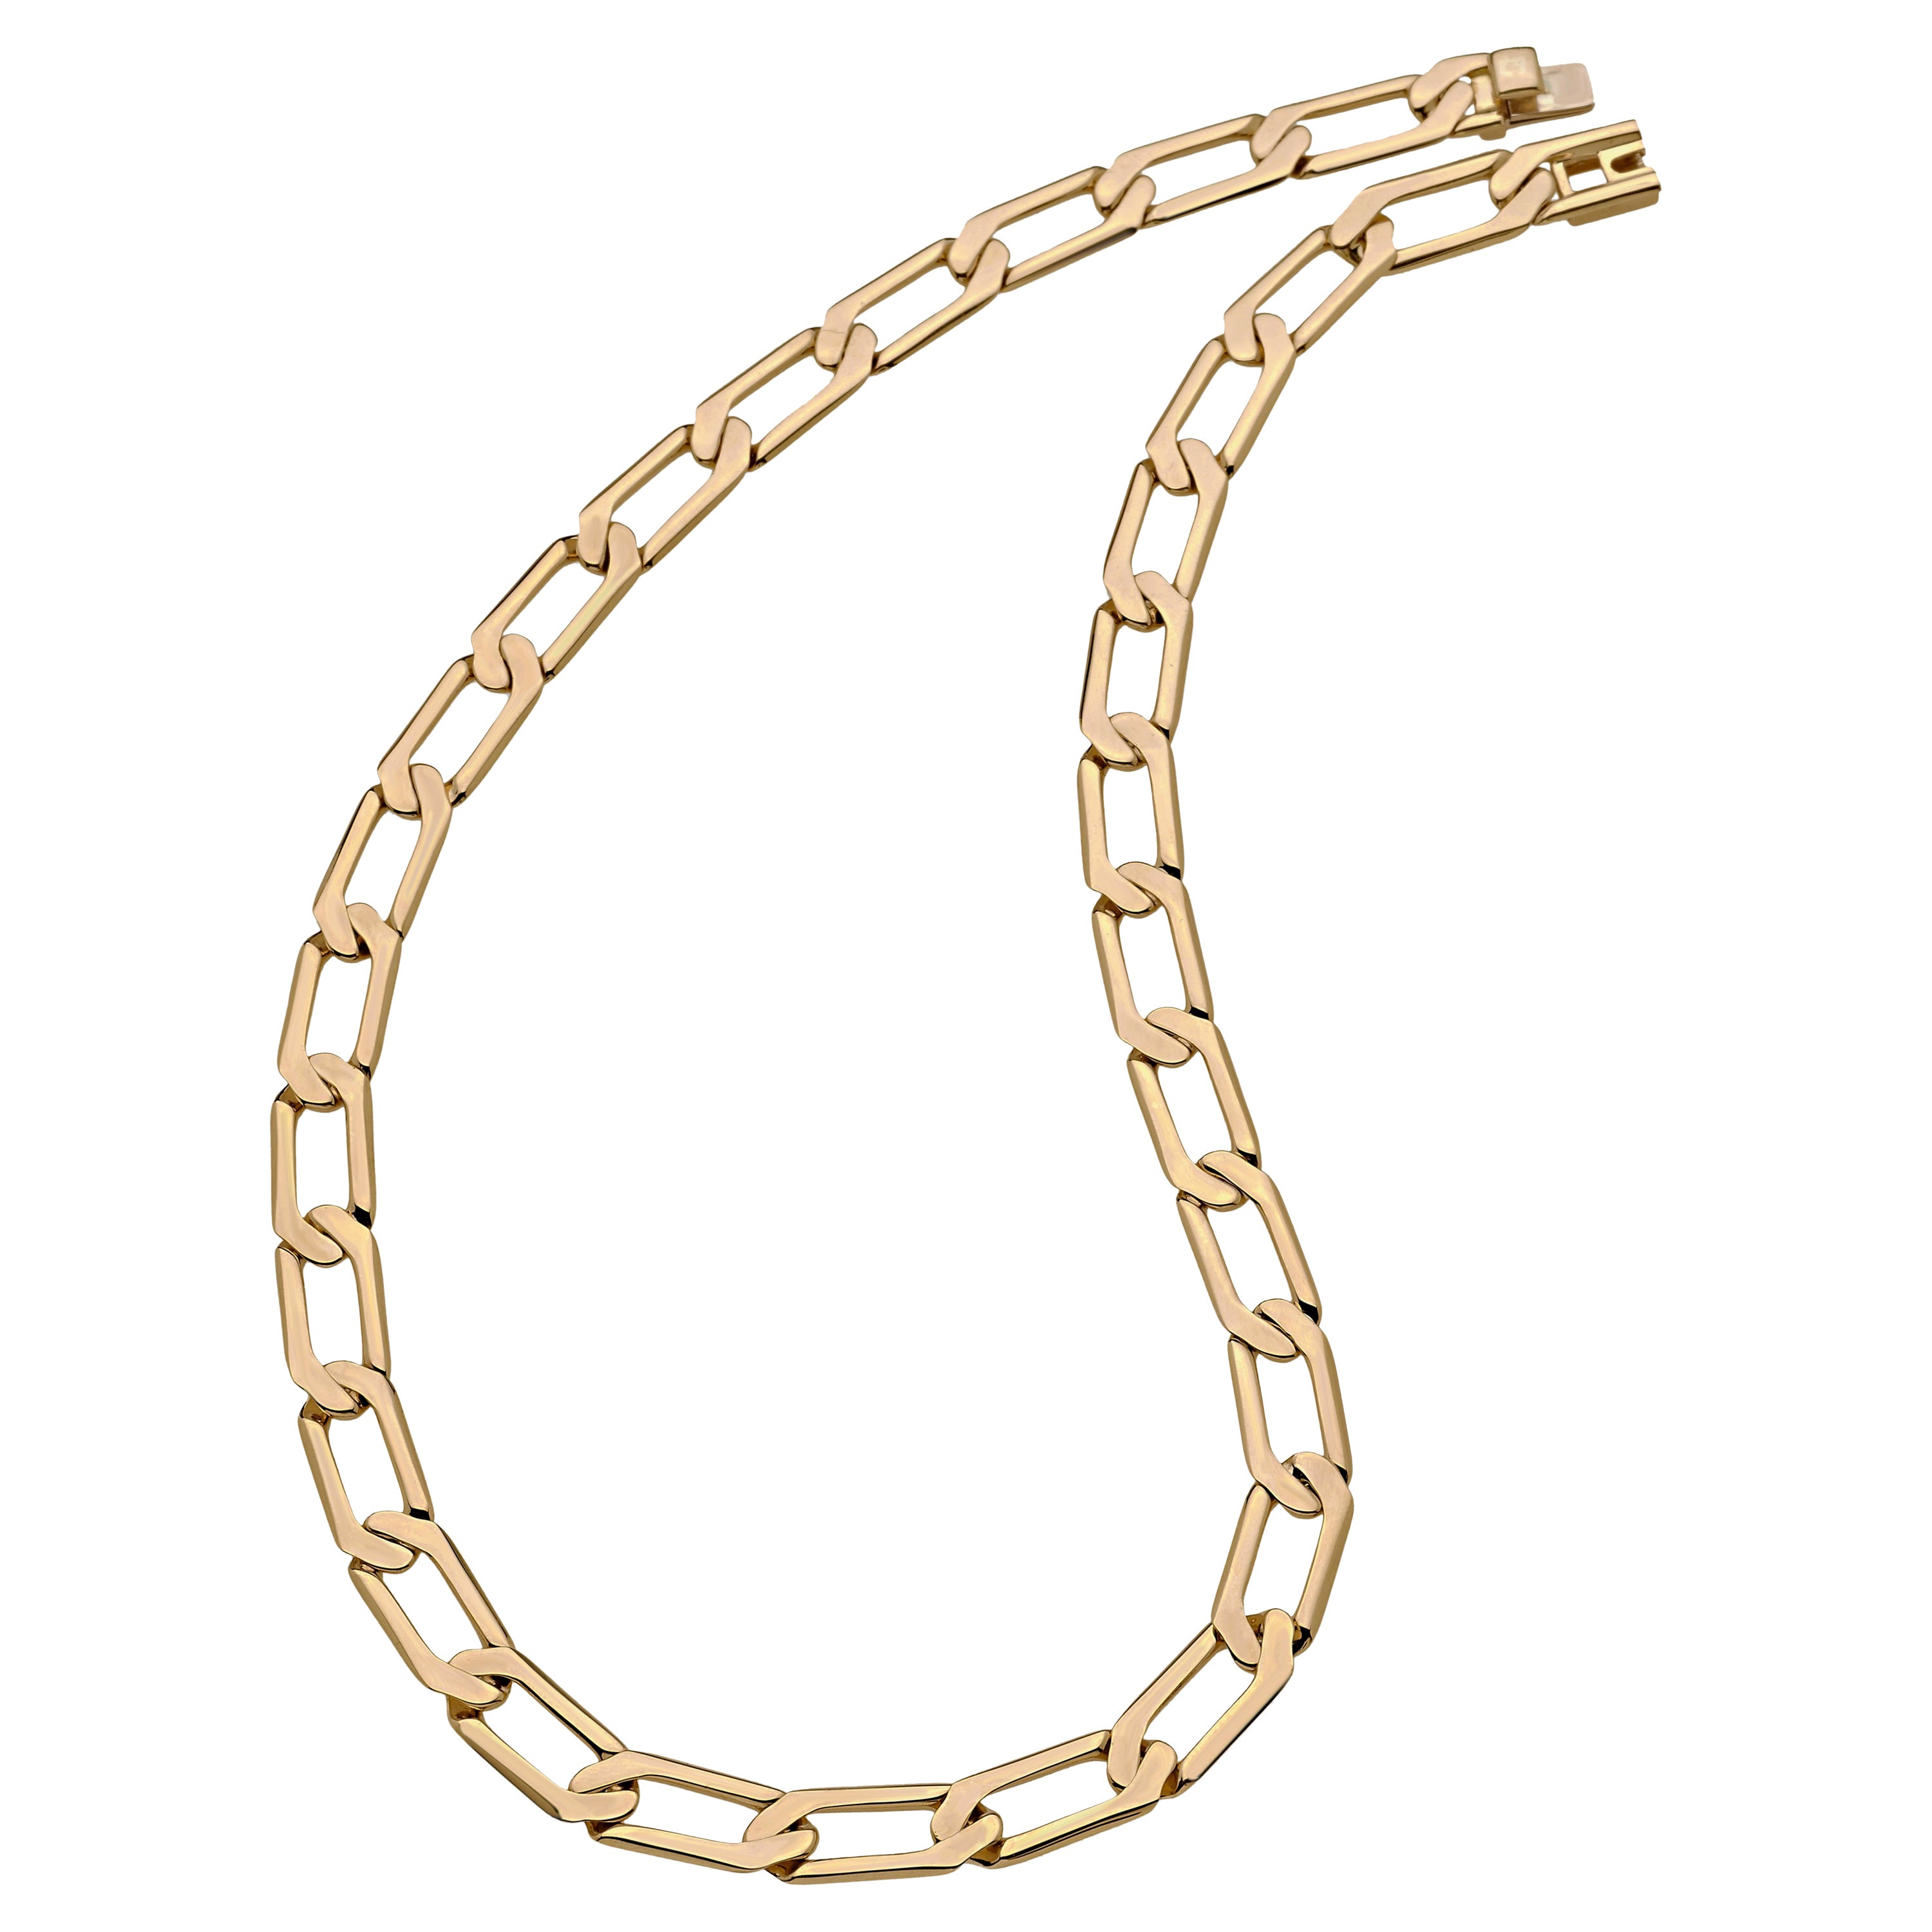 Prasi Handmade Necklace 18K Yellow Gold For Sale